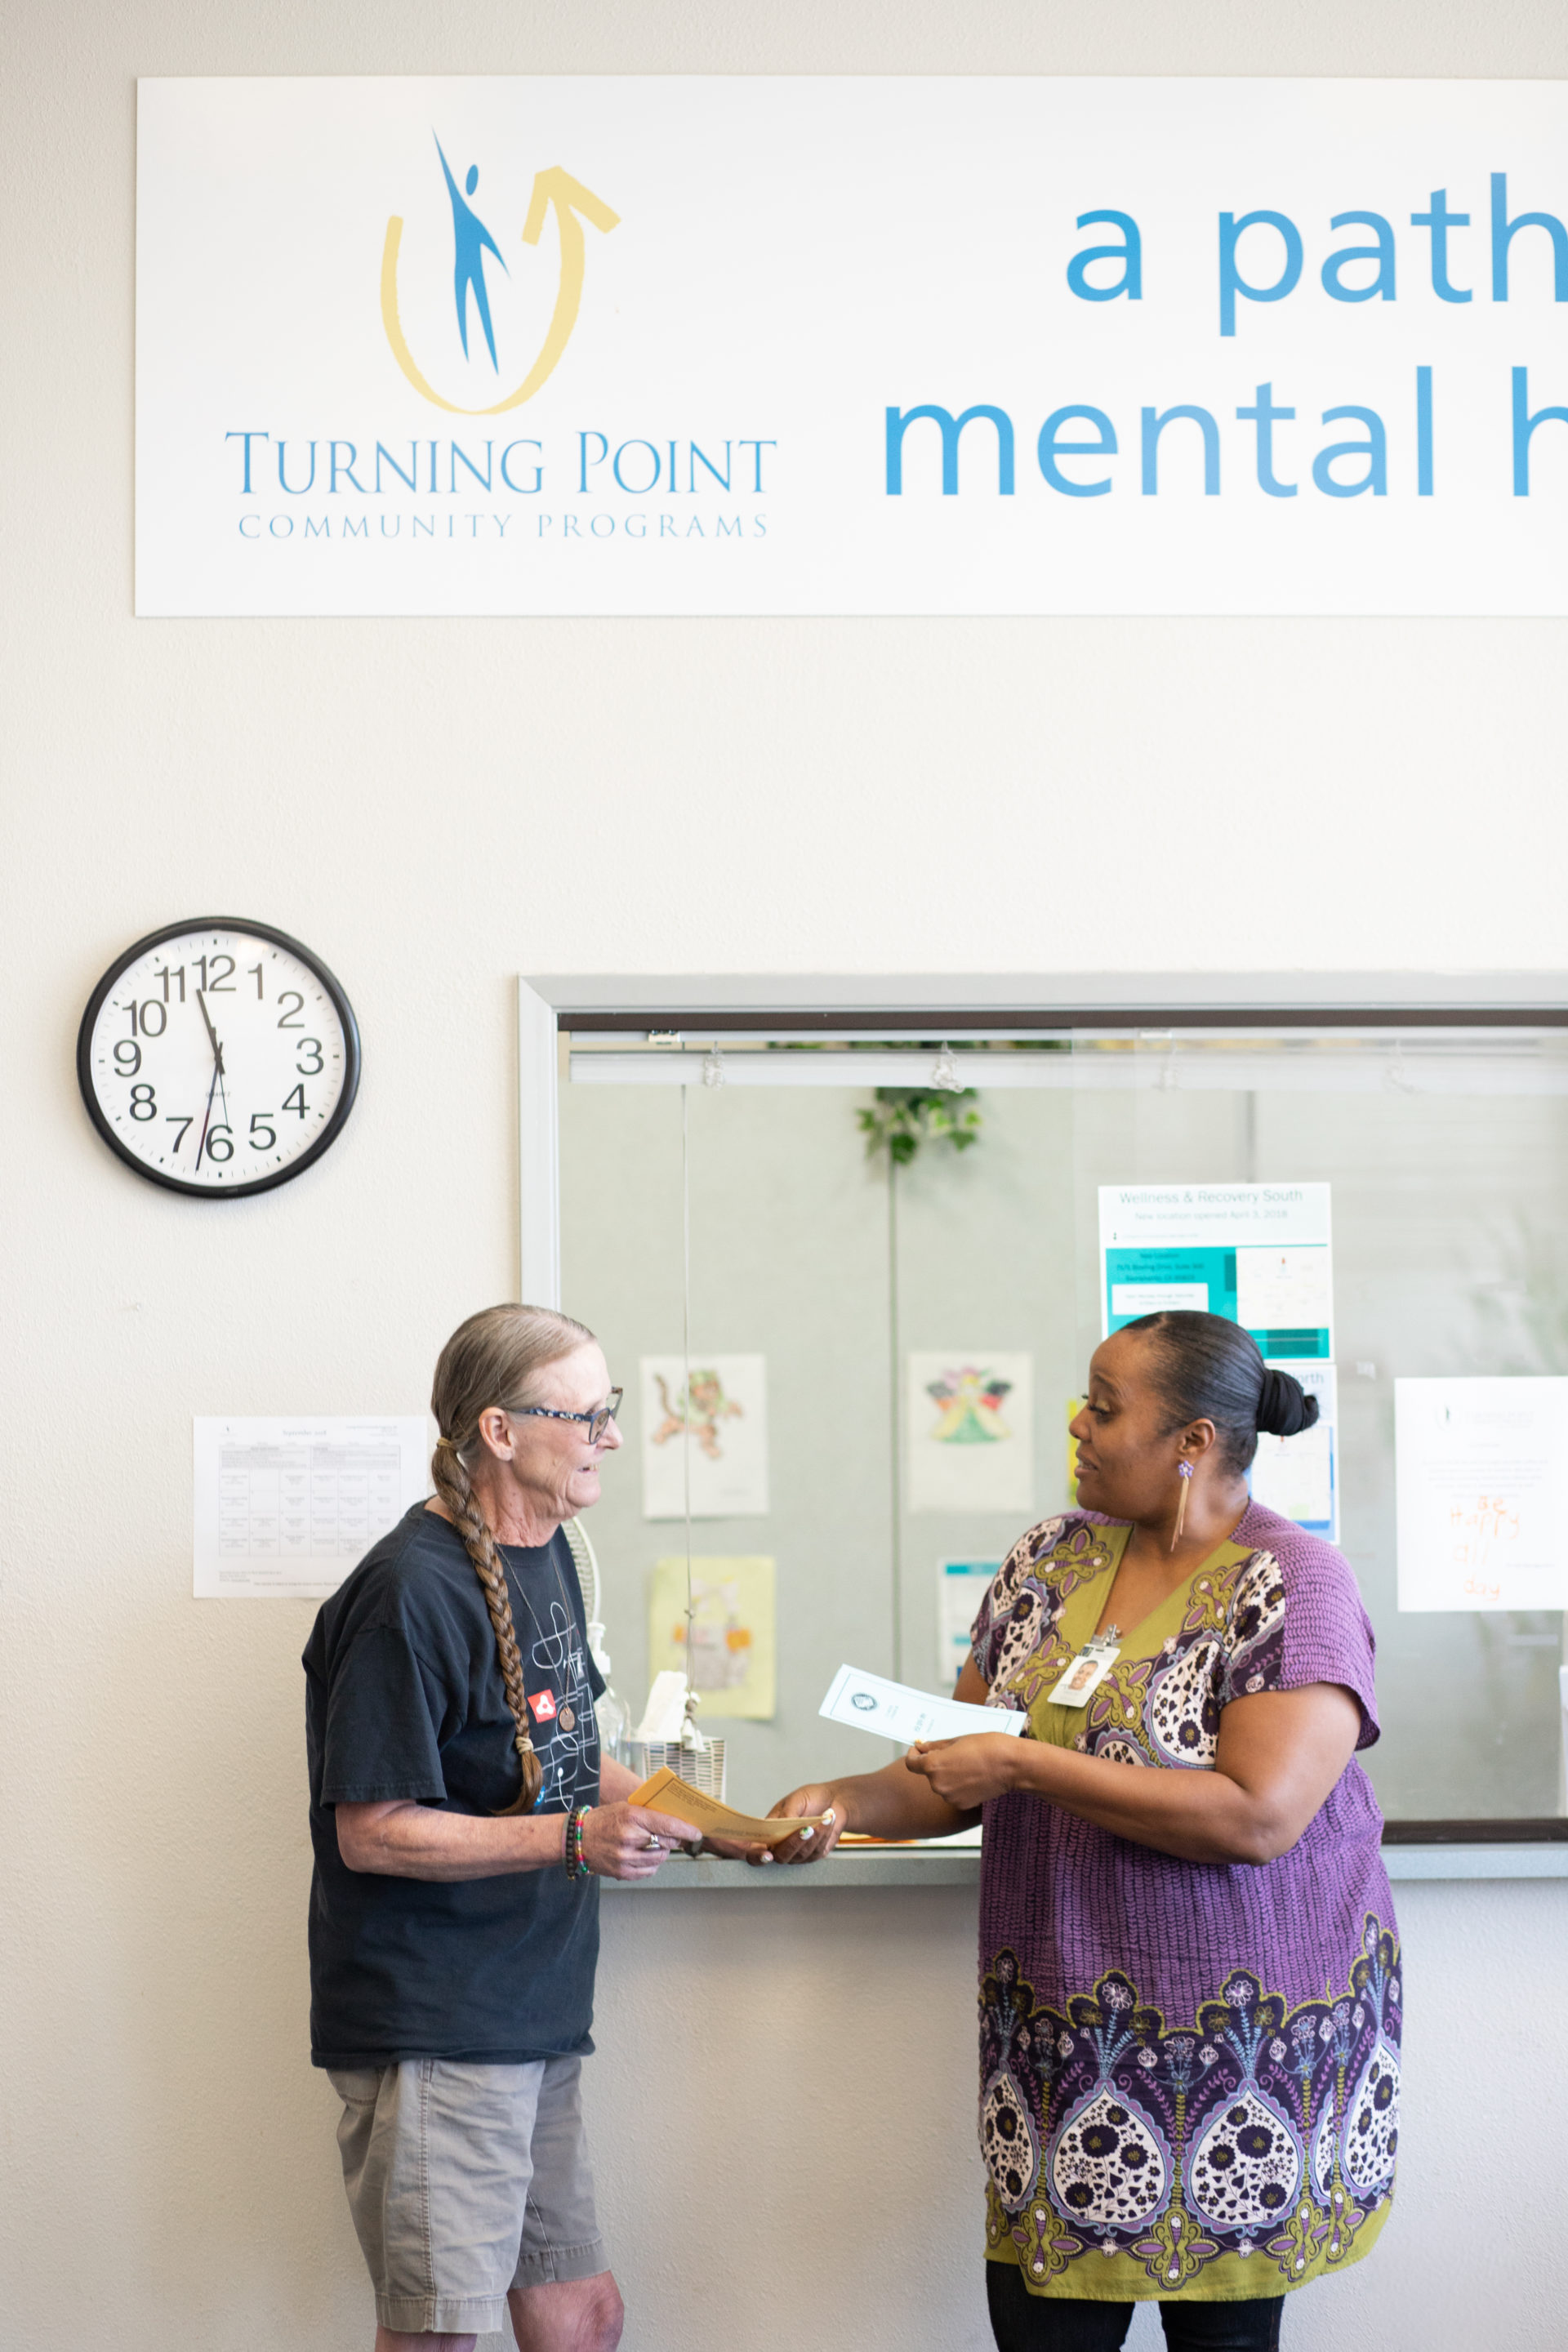 Photo of a woman handing brochures to another person in front of a recption window, under a banner with the Turning Point Community Programs logo on it.